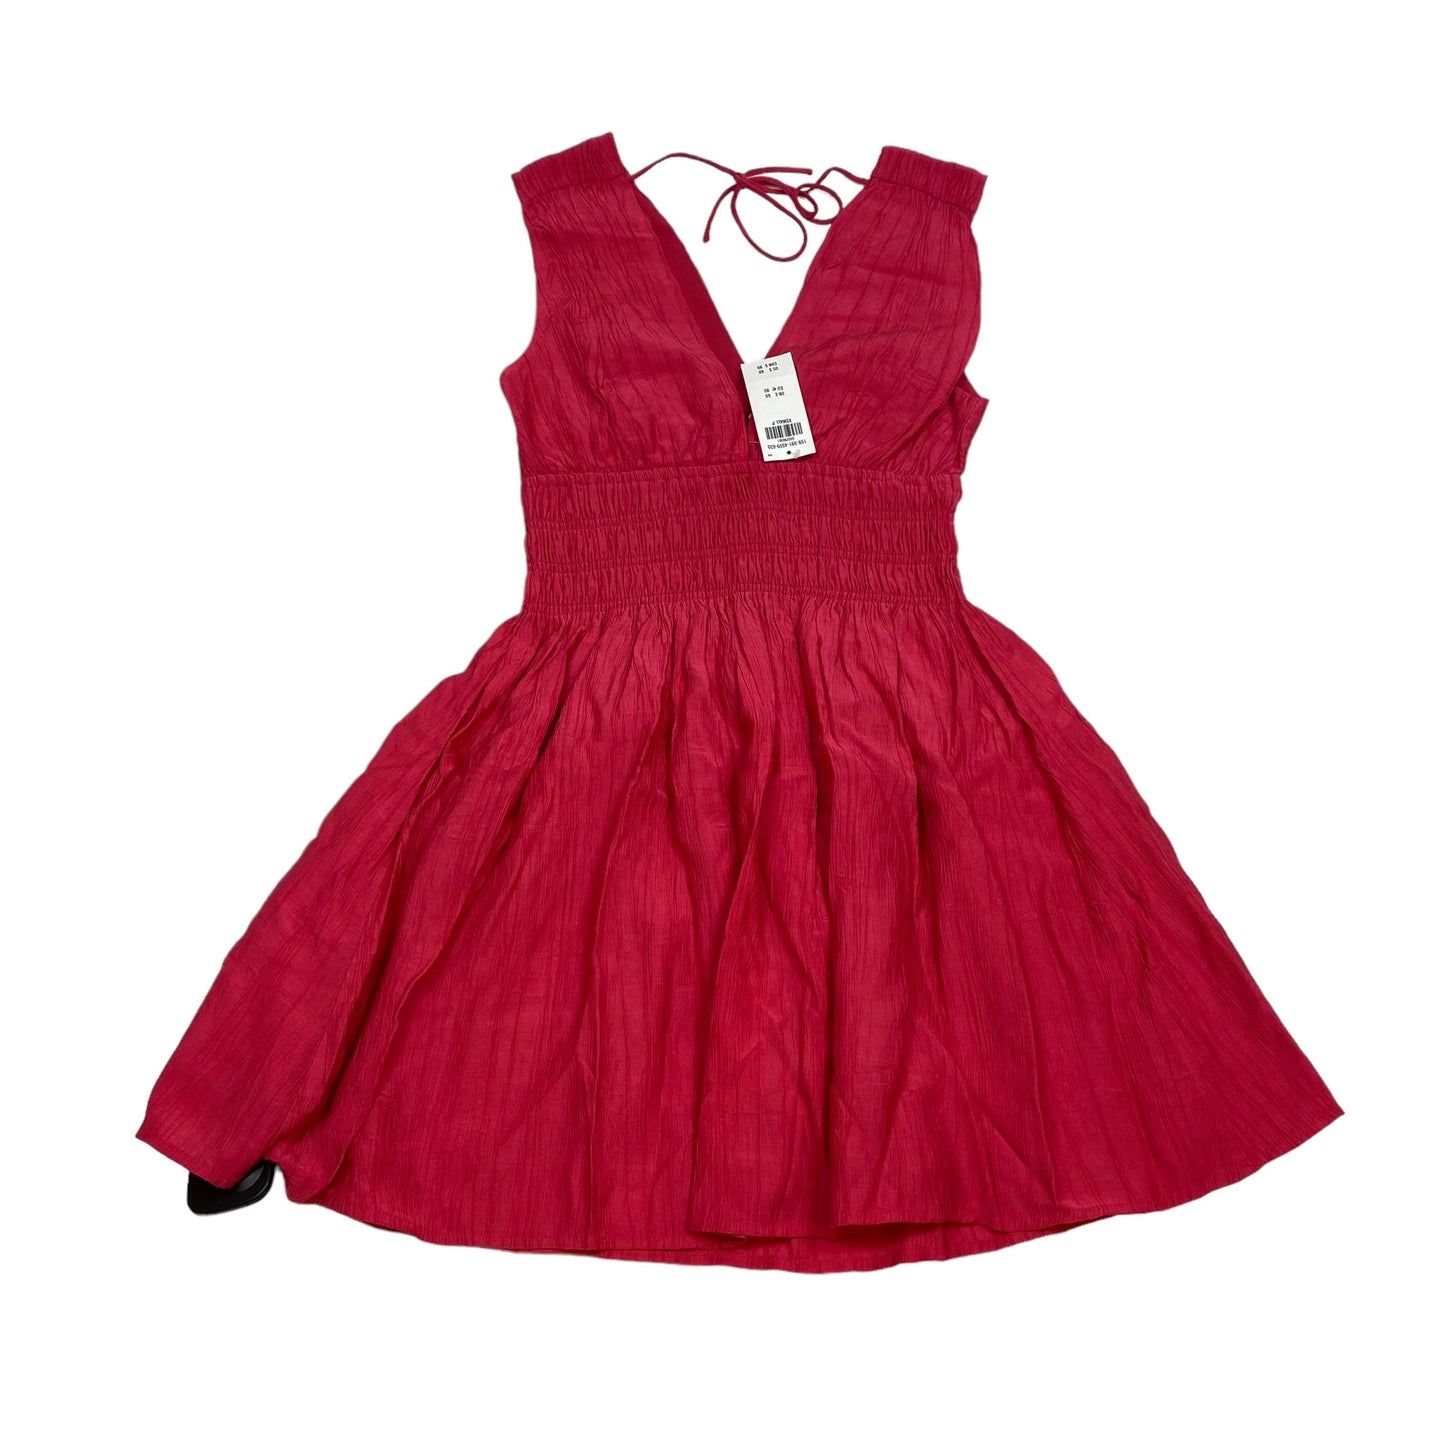 Red Dress Casual Short Abercrombie And Fitch, Size Xs